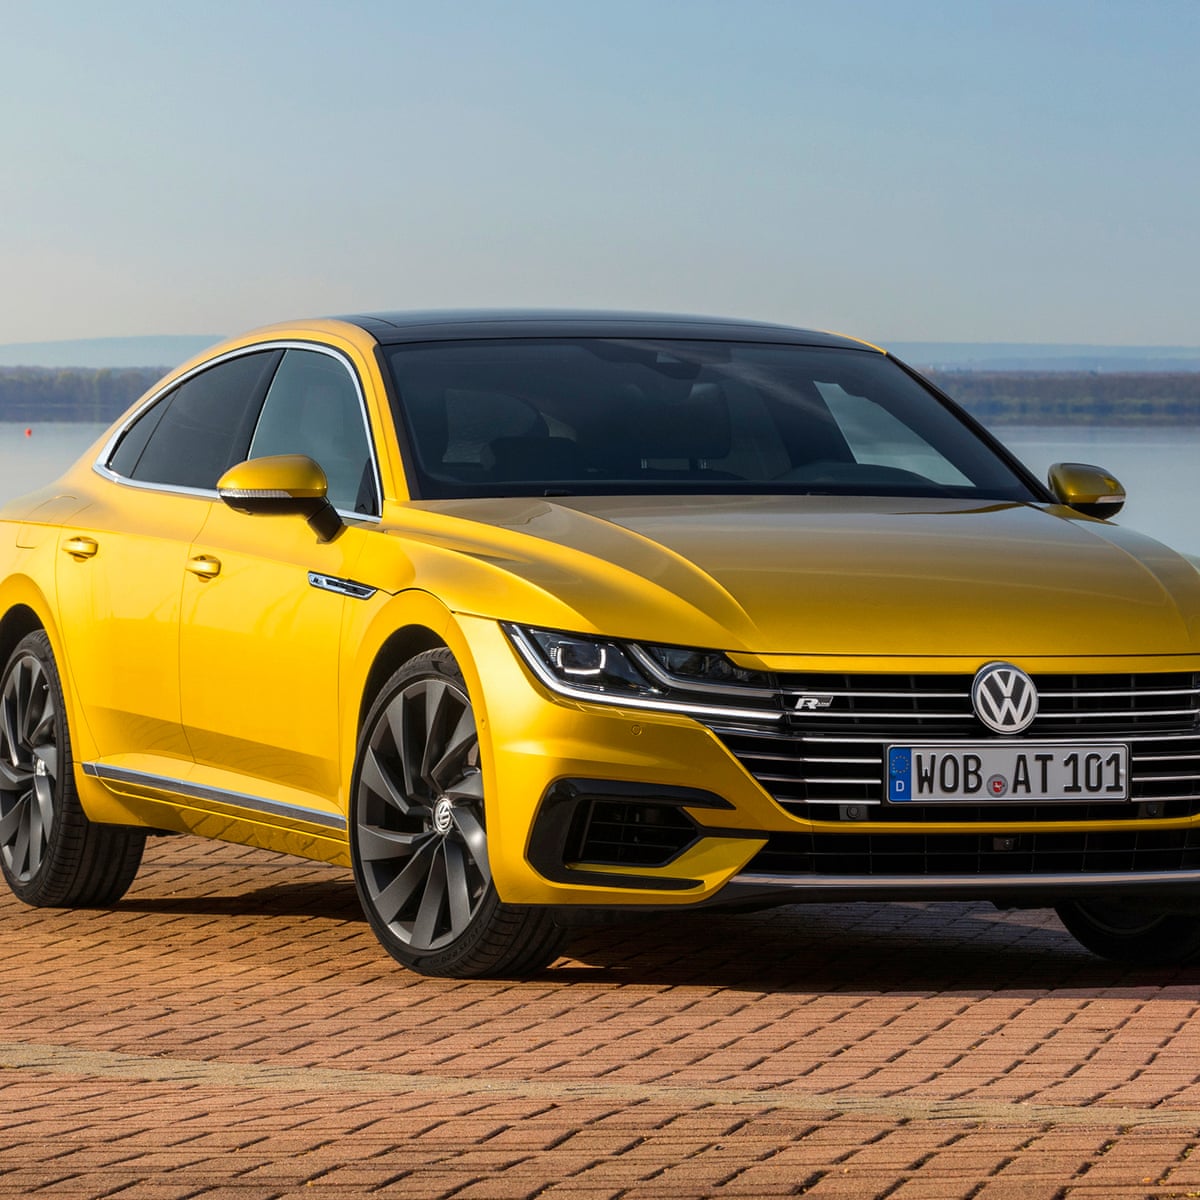 Volkswagen Arteon preview: 'Anything but bohemian